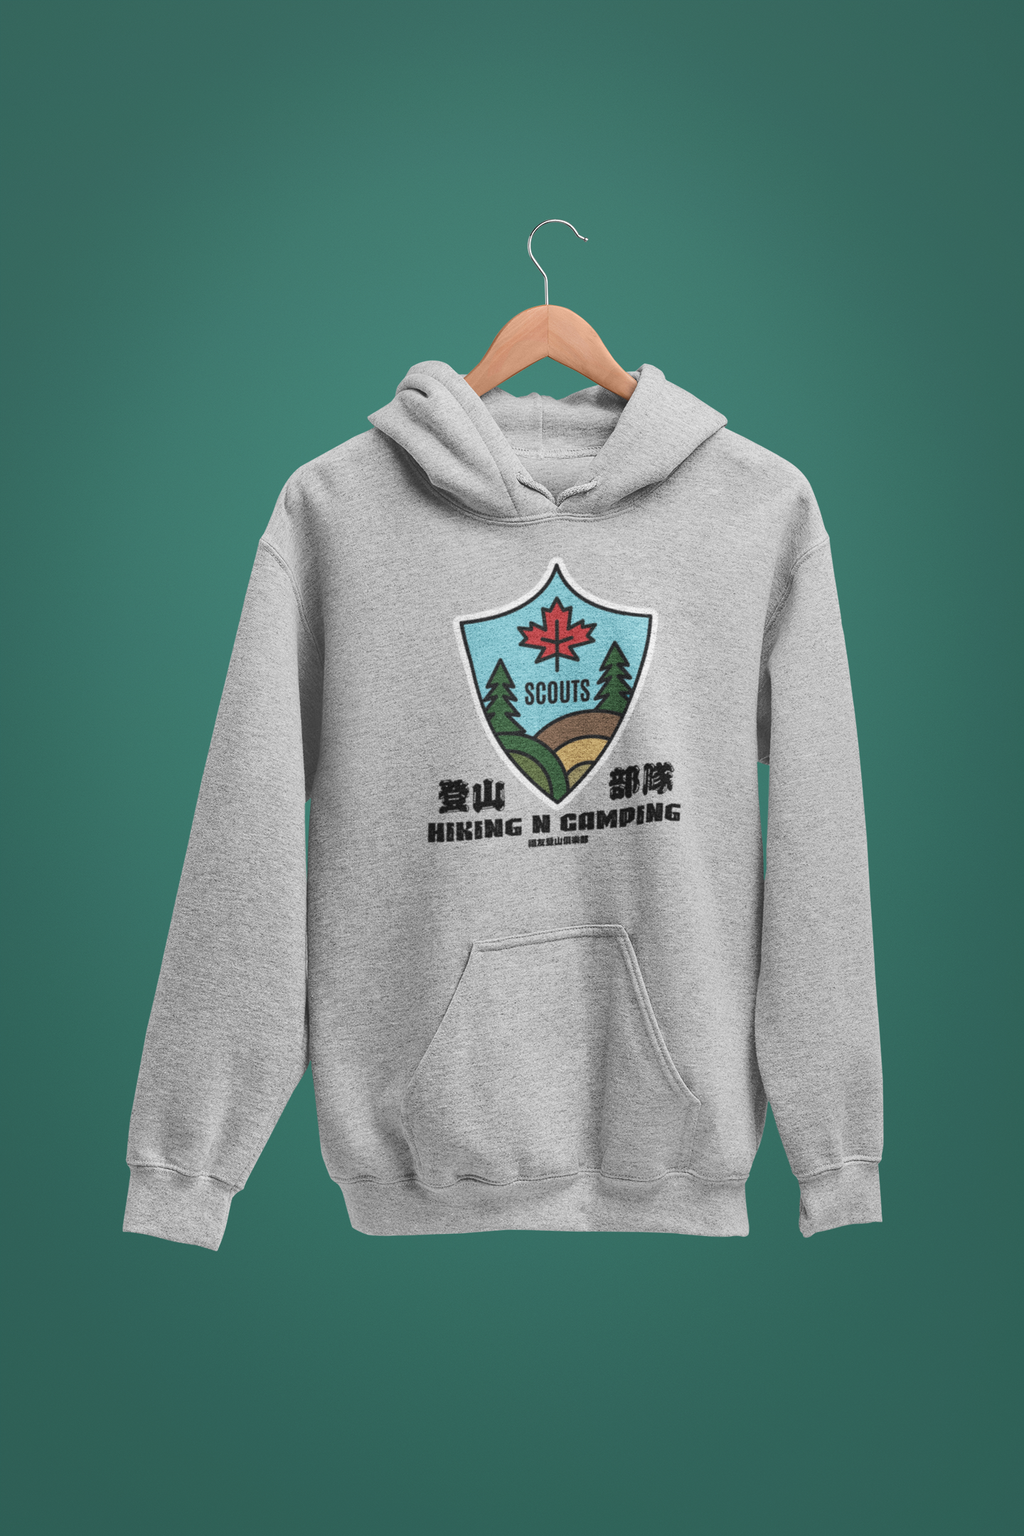 mockup-of-a-hoodie-in-a-hanger-against-a-solid-background-27735 (2).png